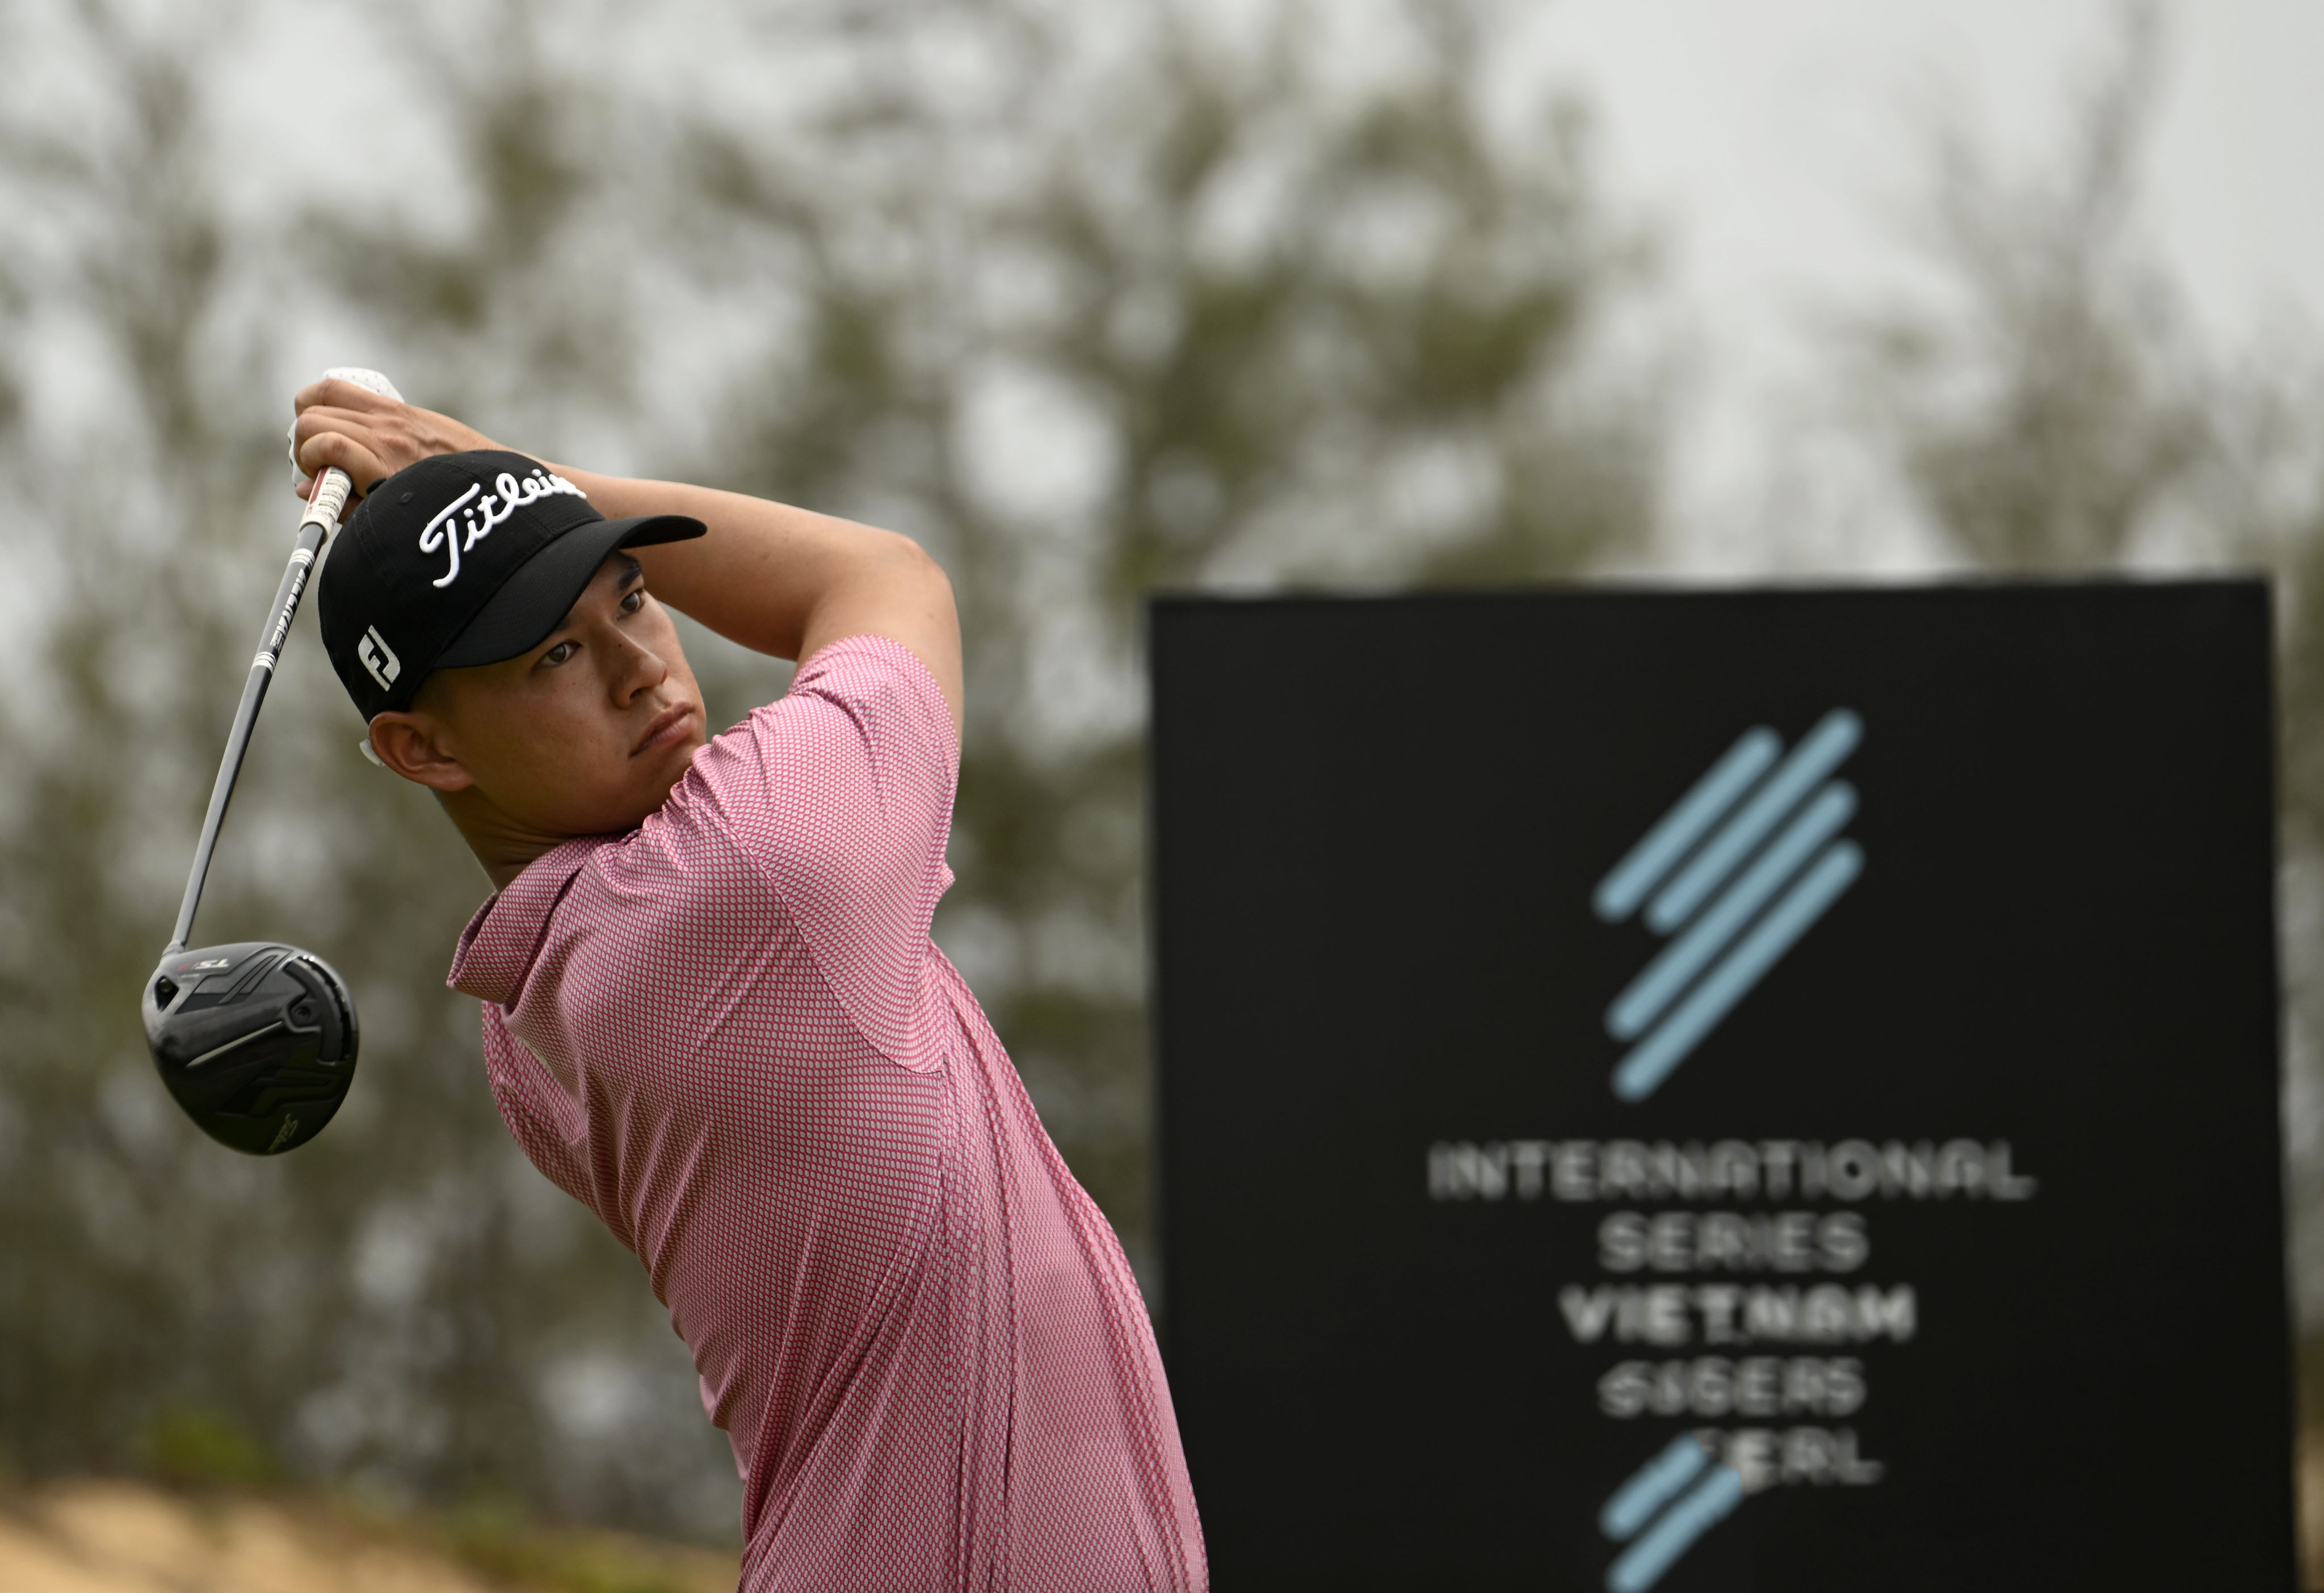 Matthew Cheung finished in a tie for 10th at the International Series Vietnam. Photo: Asian Tour.